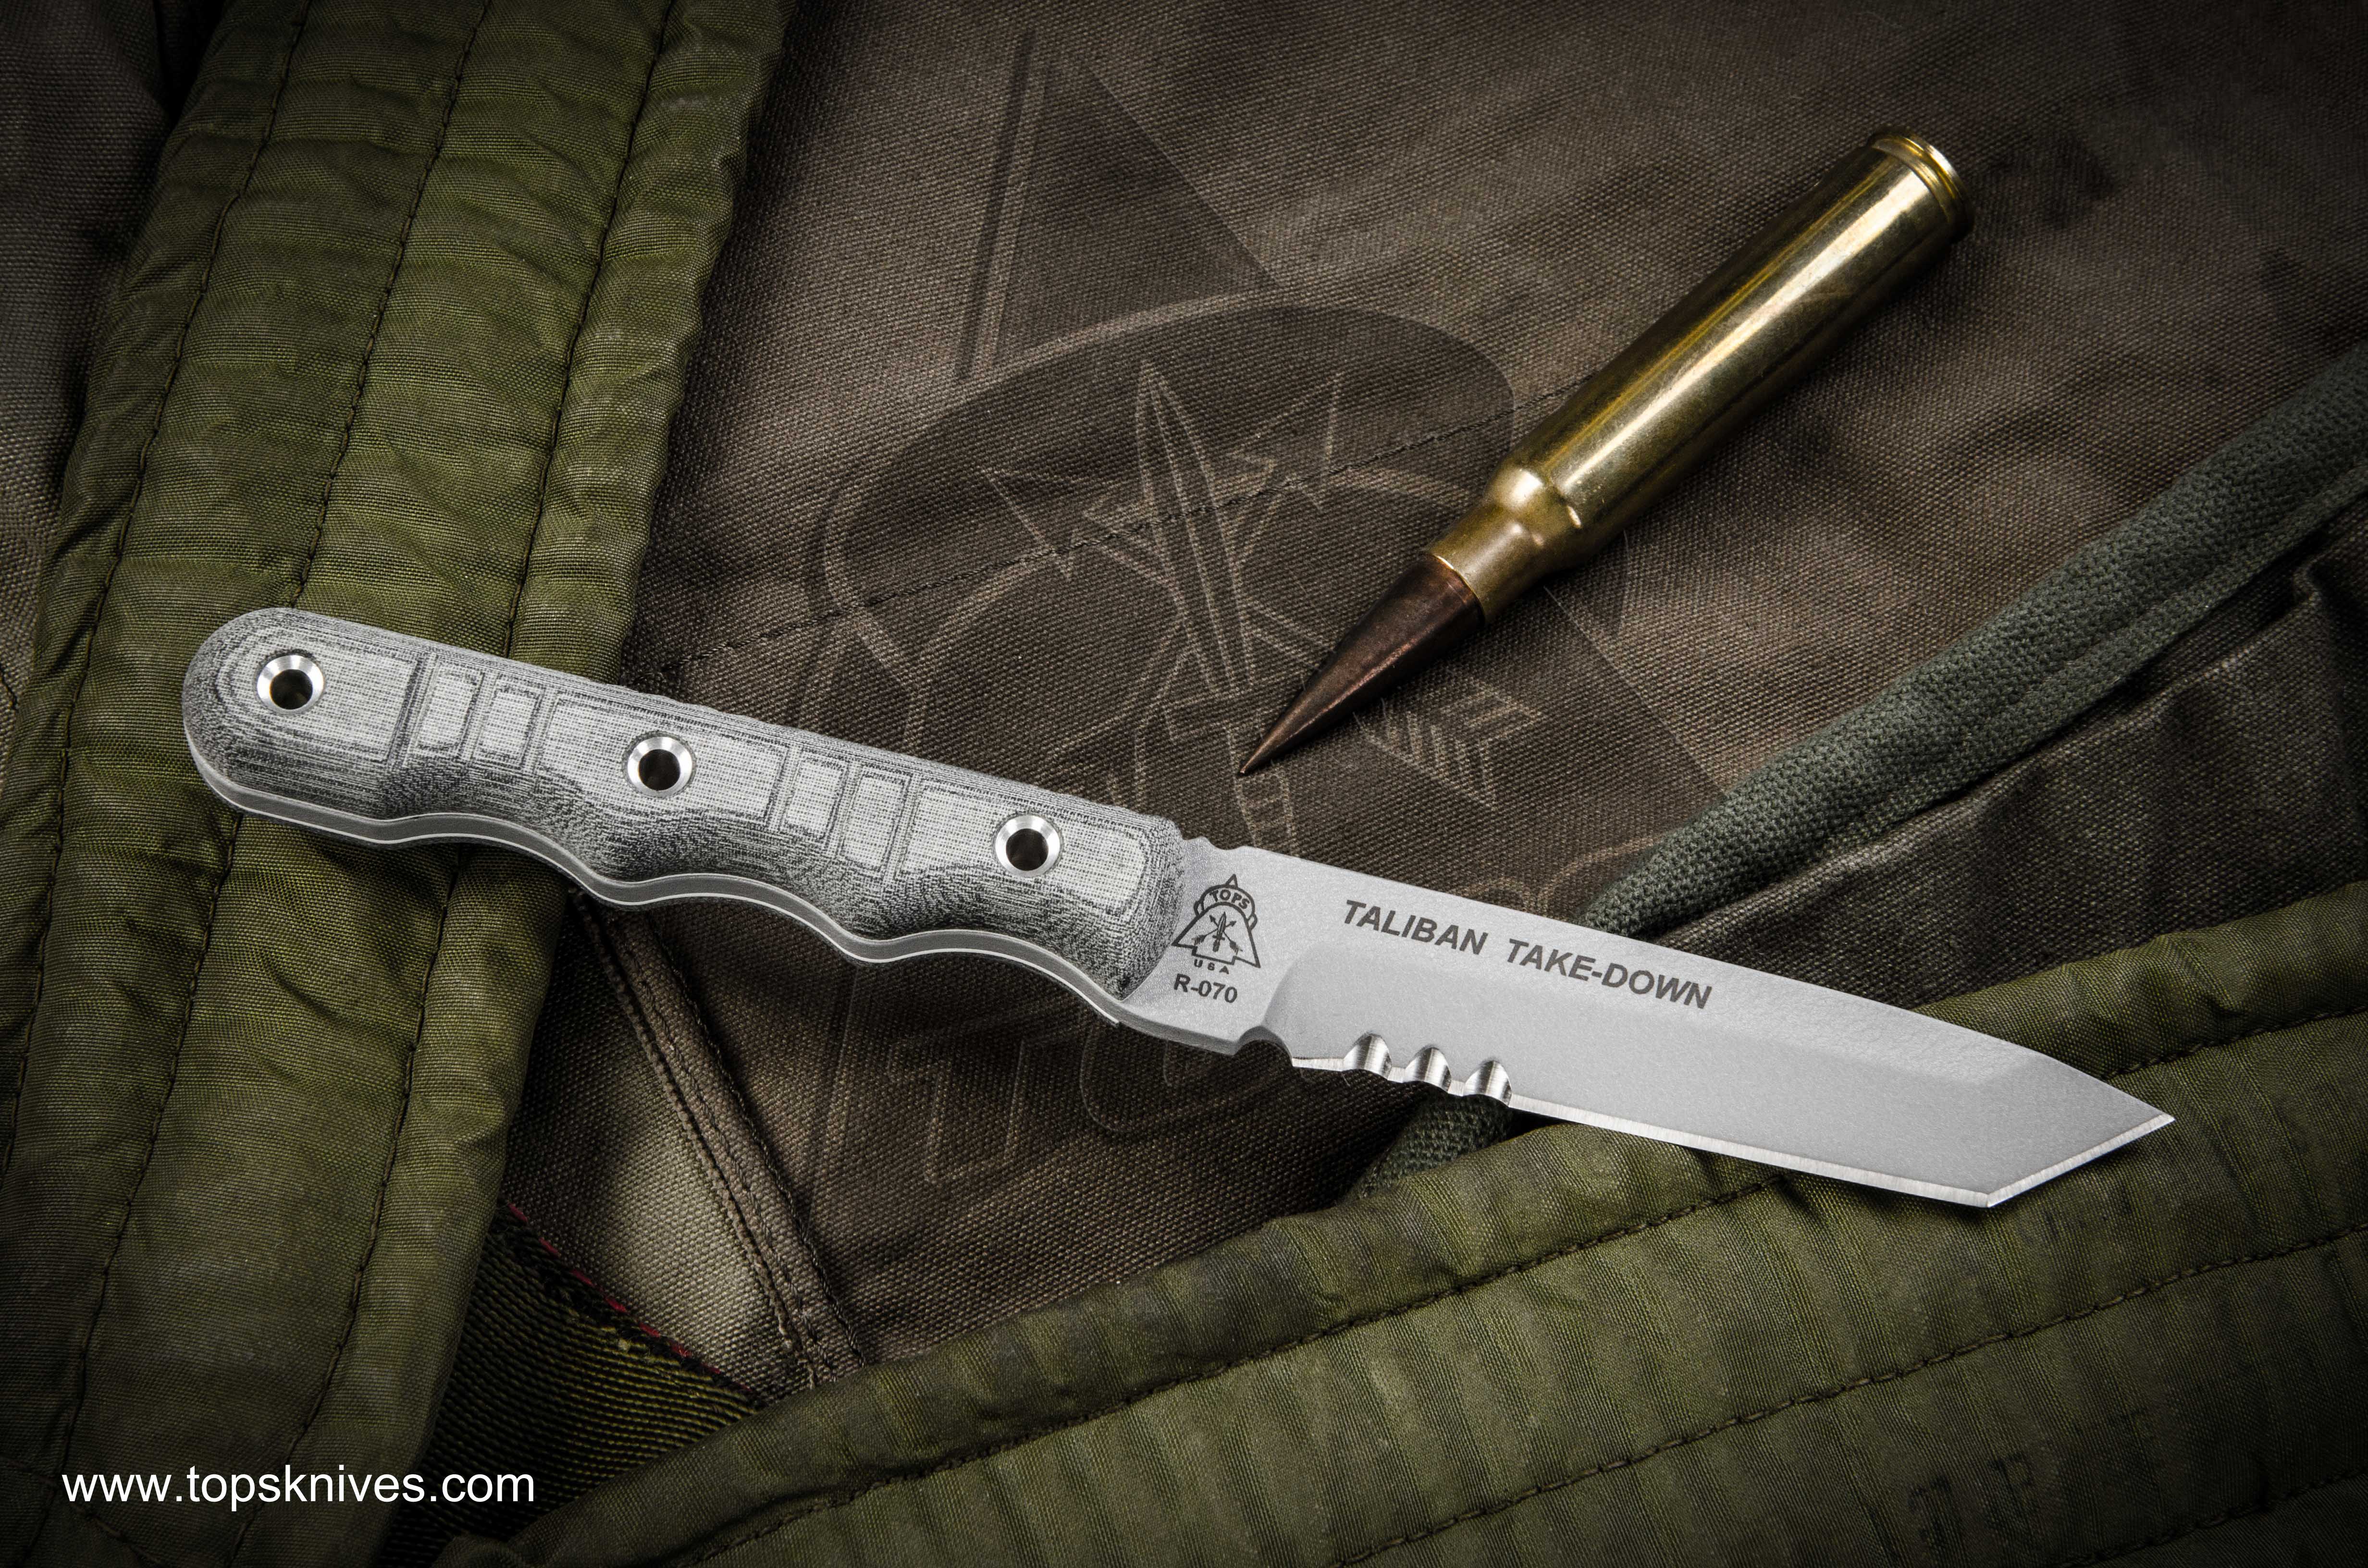 Uplifted nabo Meyella Tops Knives Taliban Take Down Fixed Blade Knife | 27% Off w/ Free S&H